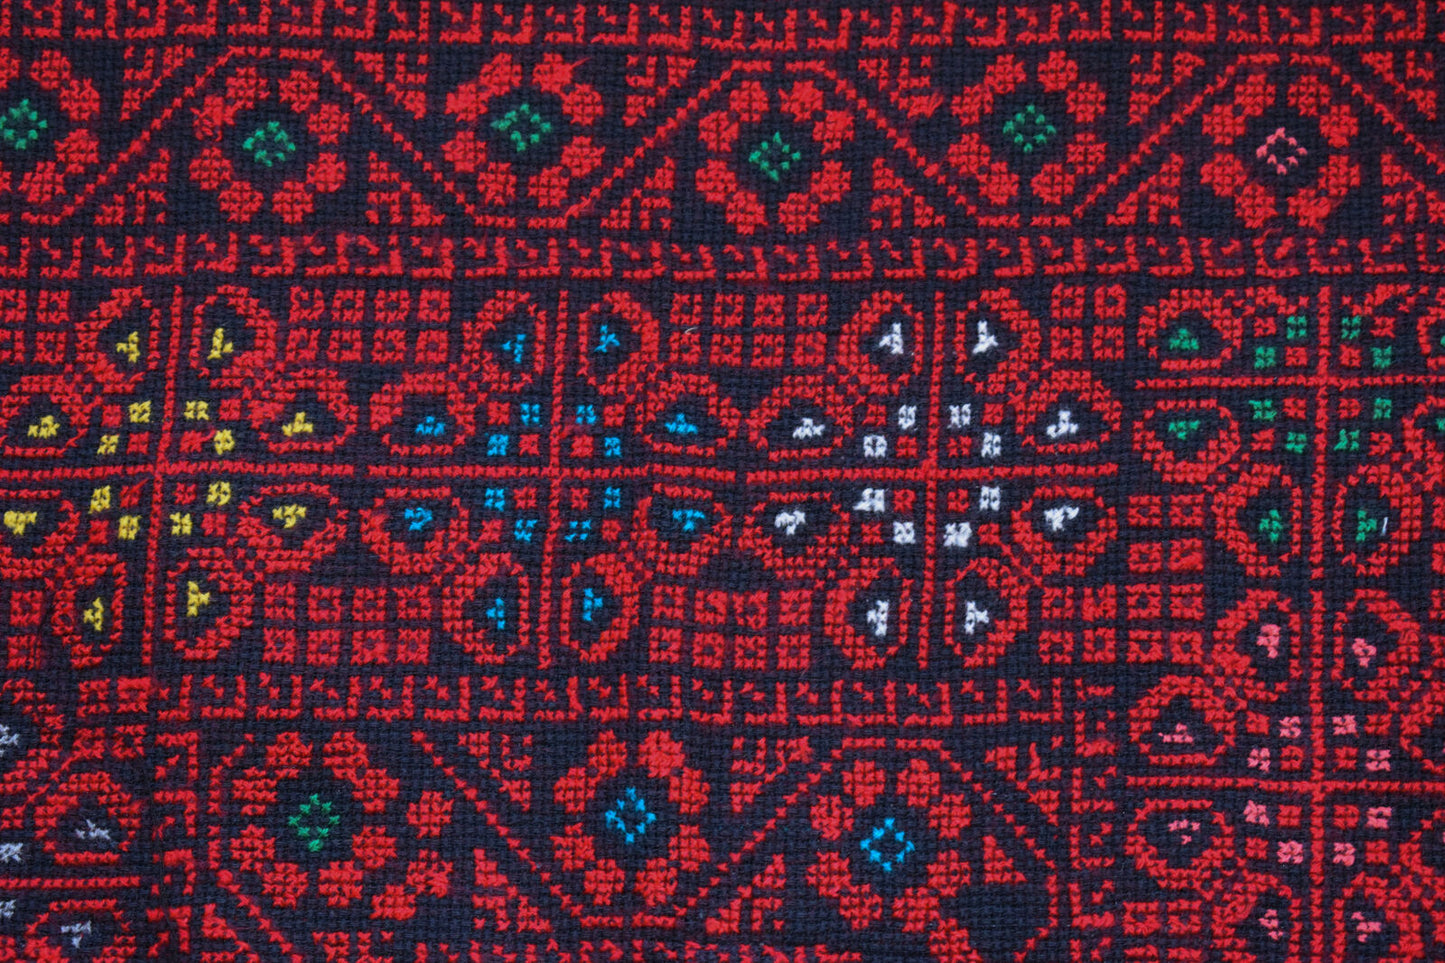 Egyptian Palestinian Bedouin Tablecloth-Hand Stitched embroidered  Tablecloth